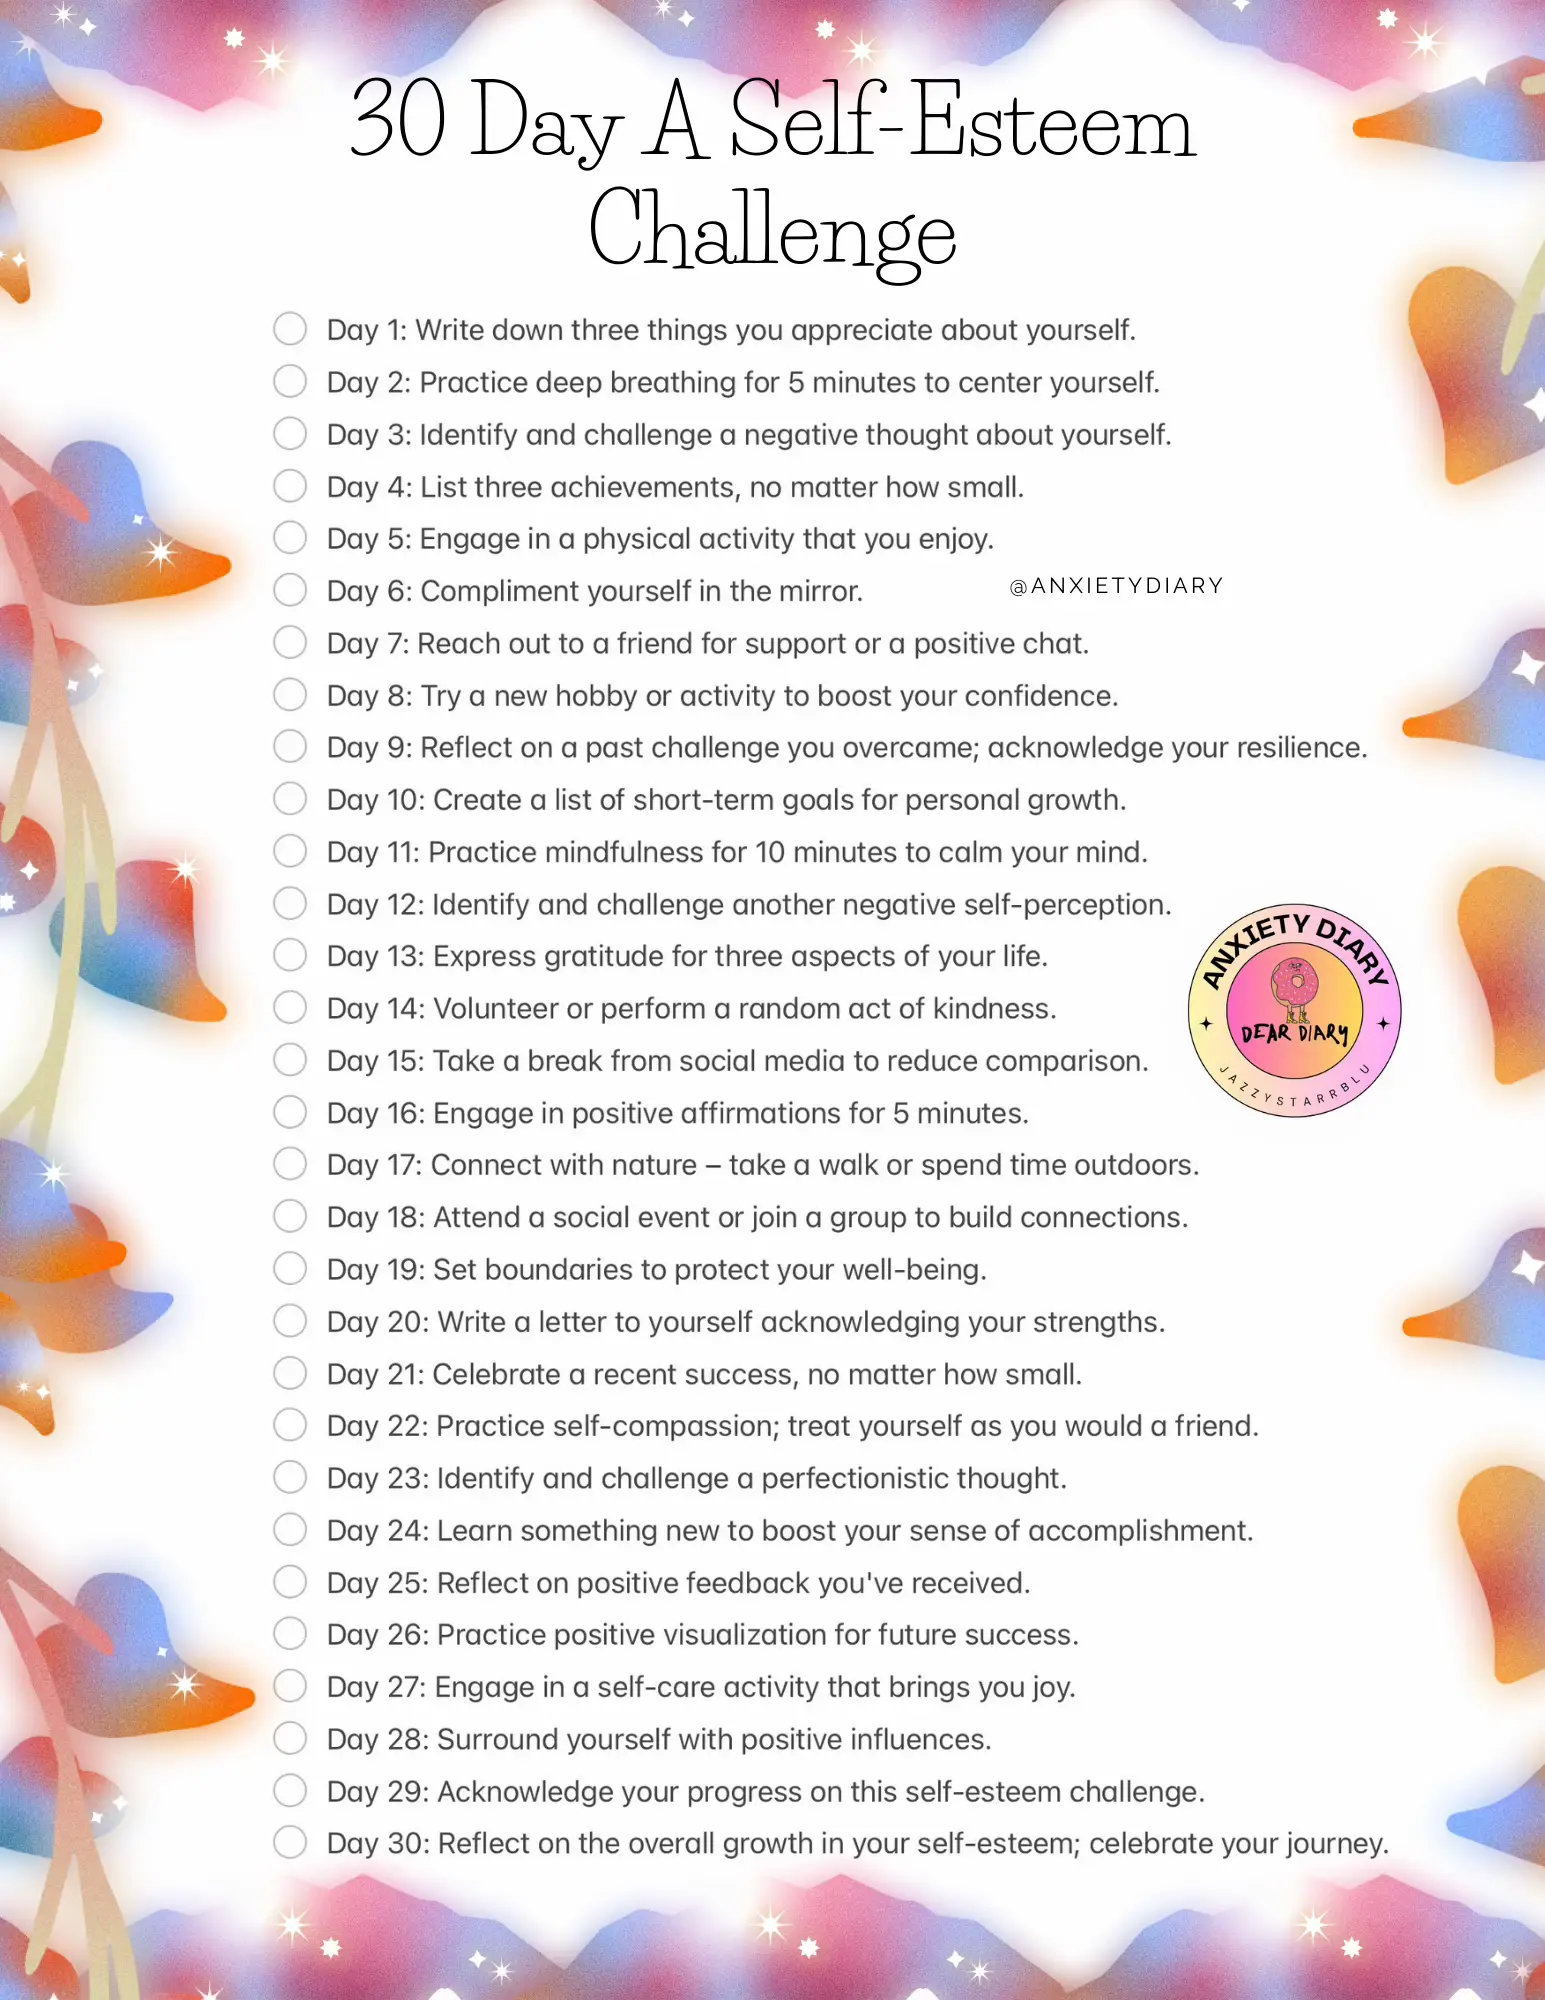 A Self-Esteem Challenge for Anxiety Relief ✨